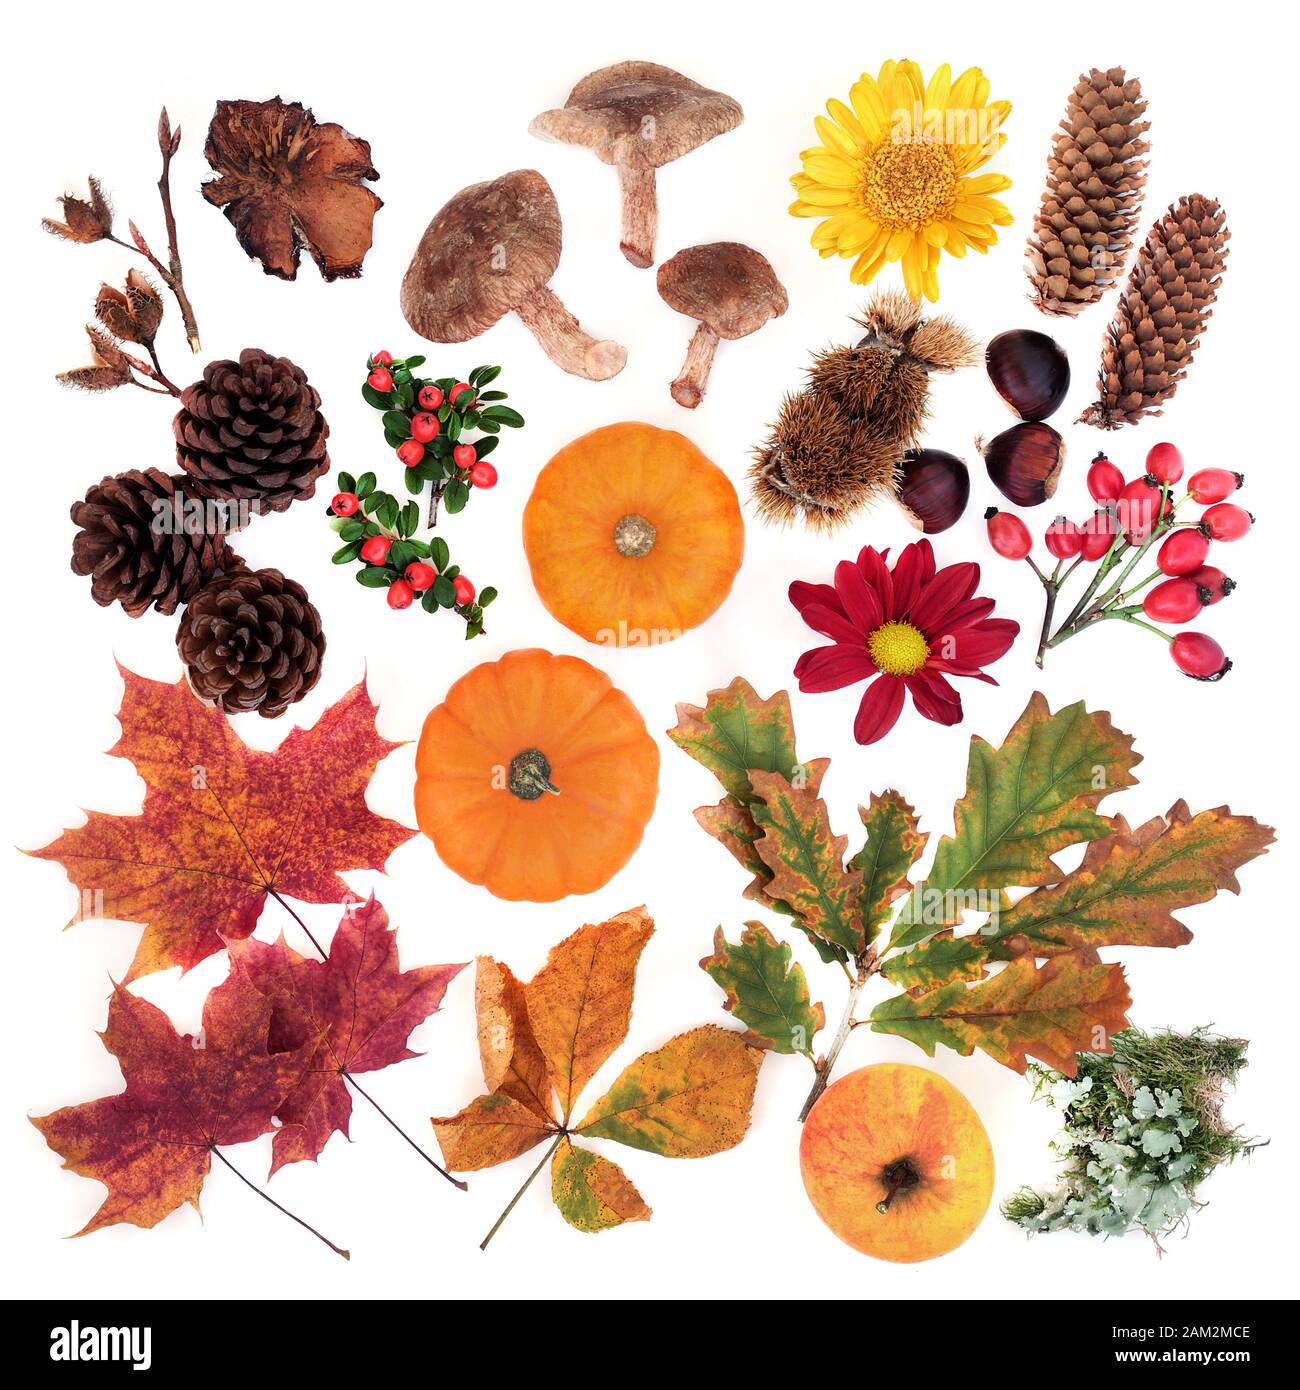 Nature composition in Autumn for botanical study with food, flora and fauna on white background. Top view. Harvest festival theme. Stock Photo